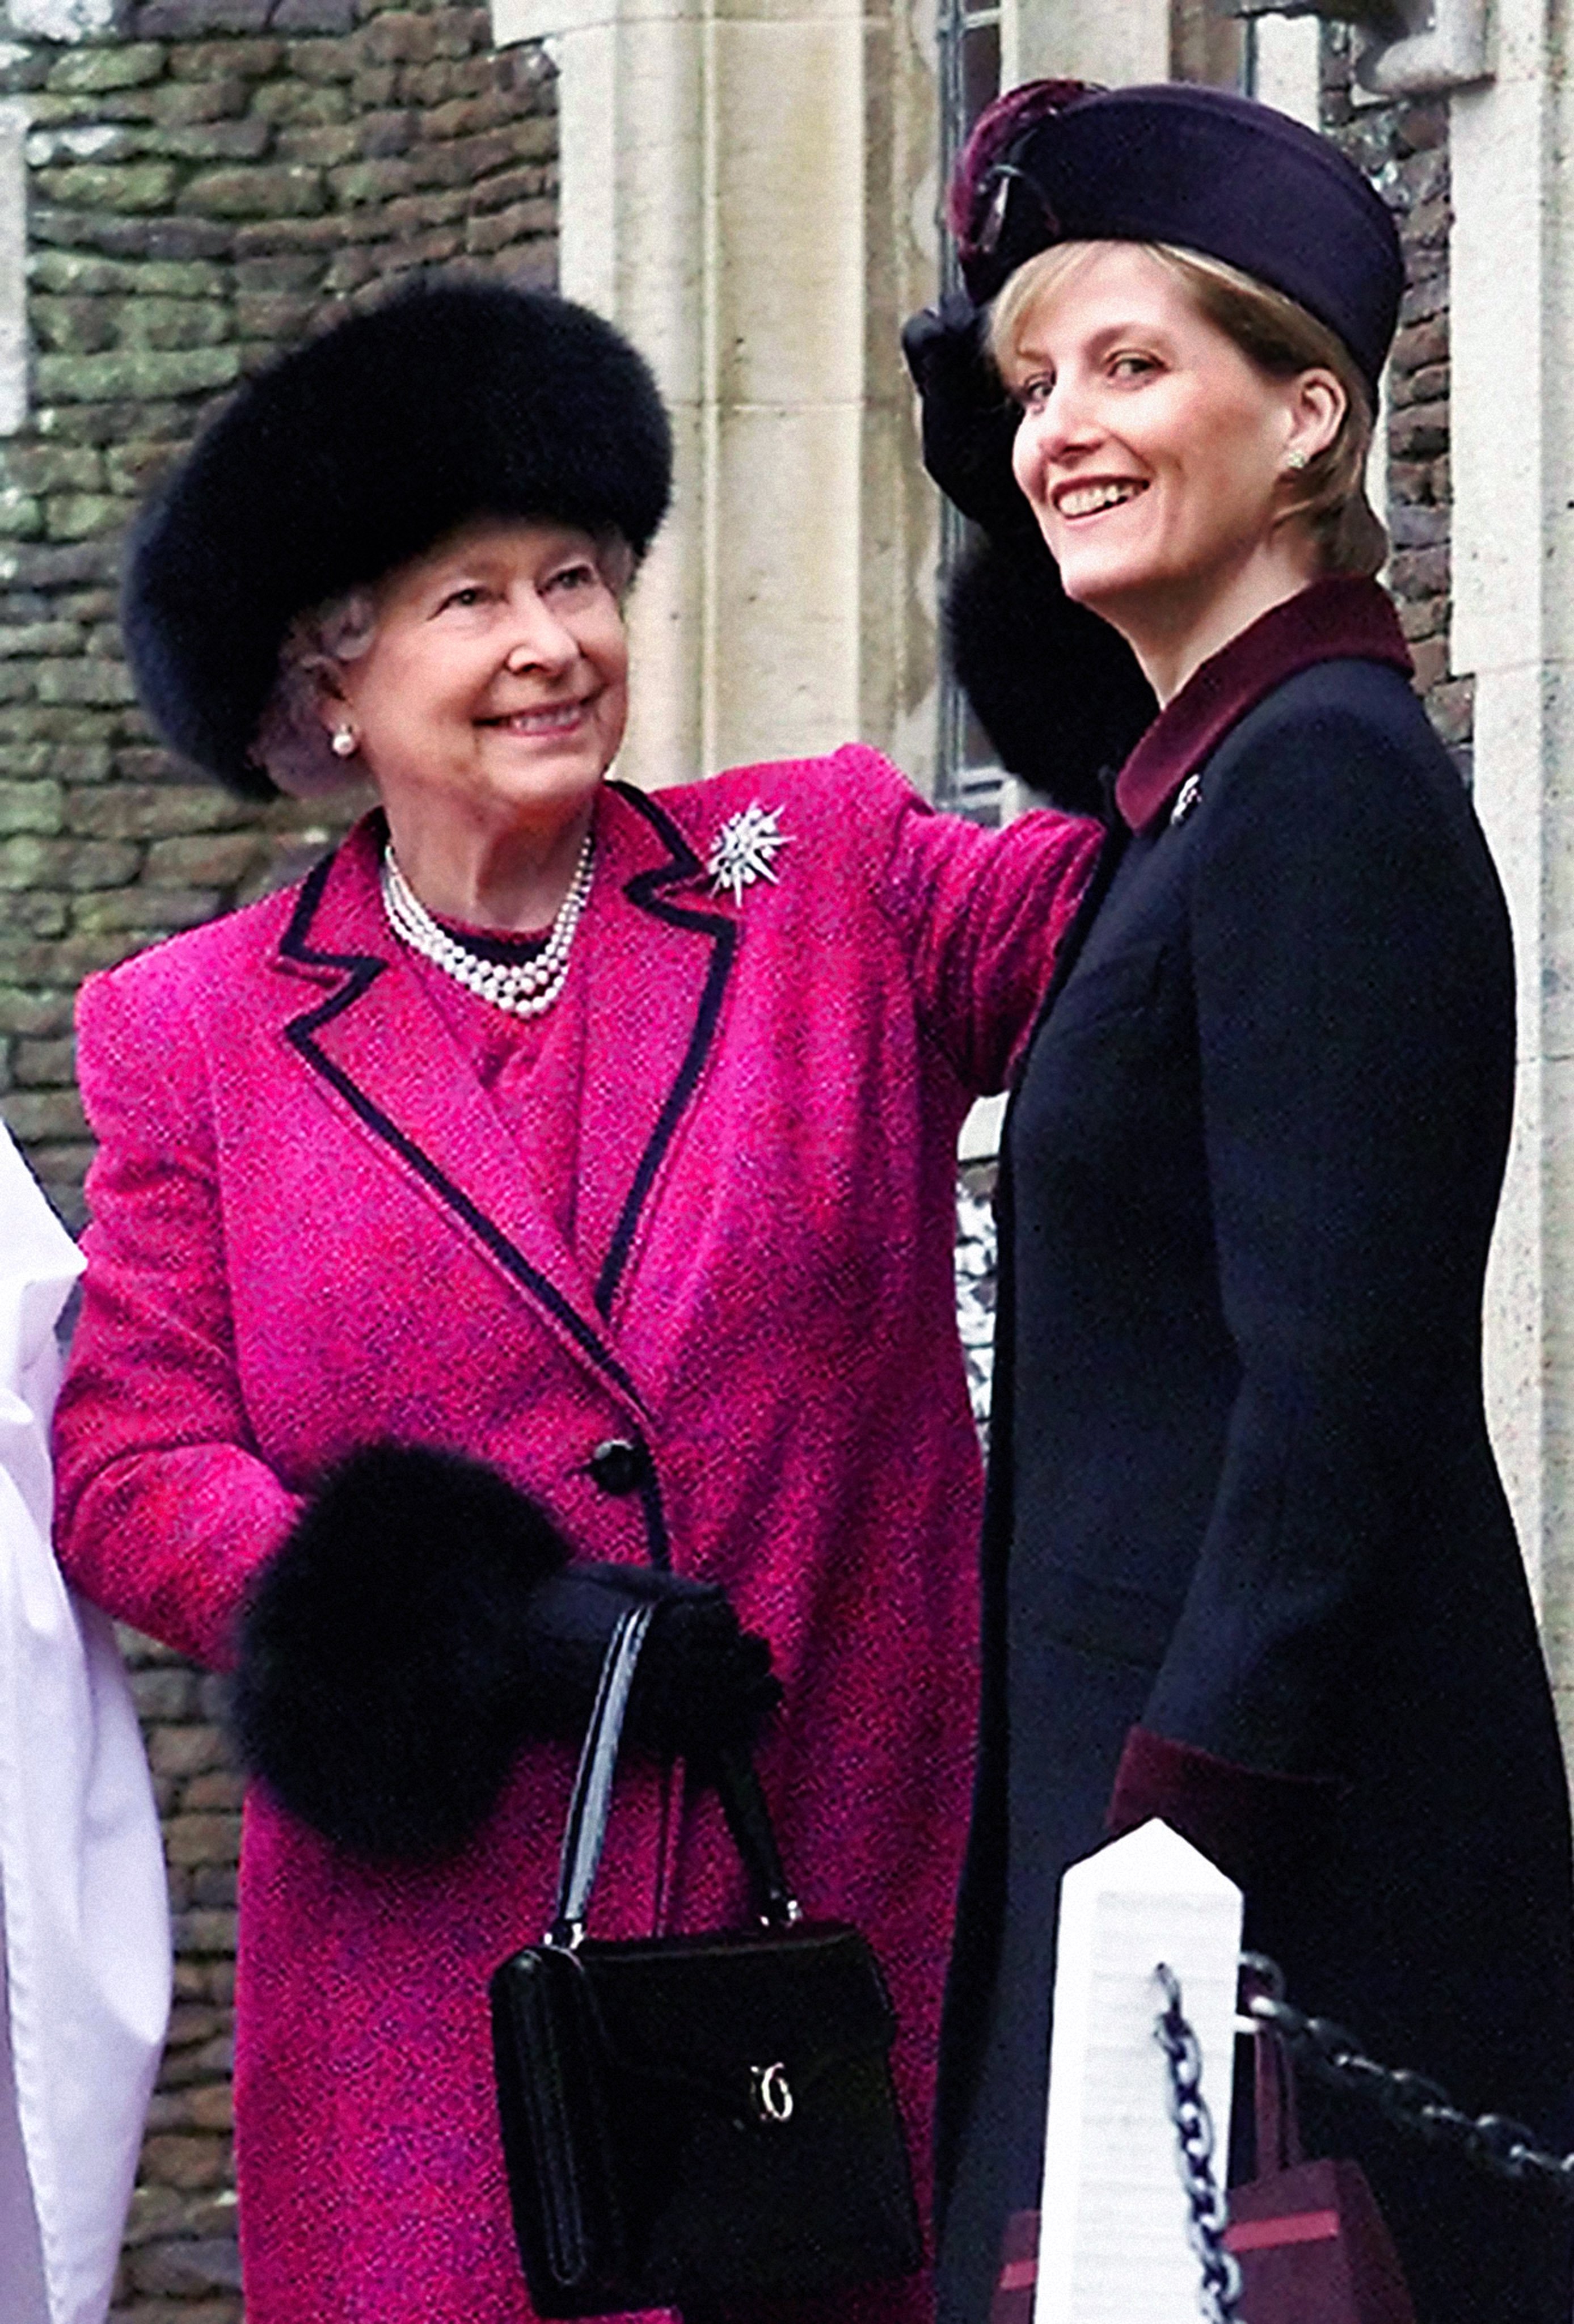 Britain's Queen Elizabeth II straightens Sophie, The Countess of Wessex's hat while they wait to attend the Christmas Day service at the Sandringham Church. | Source: Getty Images